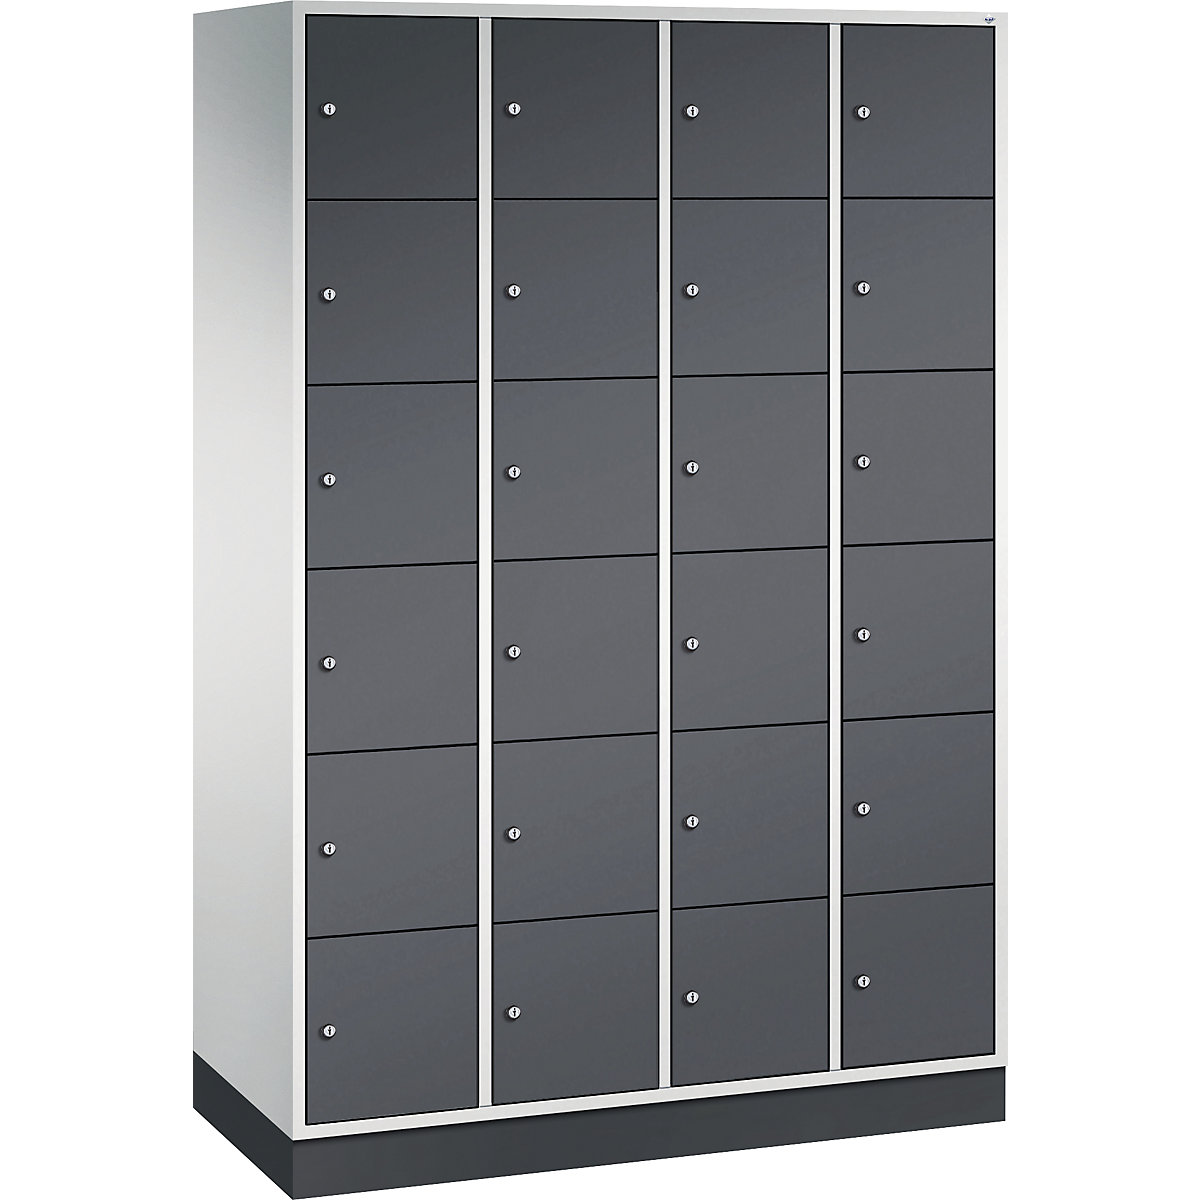 INTRO steel compartment locker, compartment height 285 mm – C+P, WxD 1220 x 500 mm, 24 compartments, light grey body, black grey doors-13